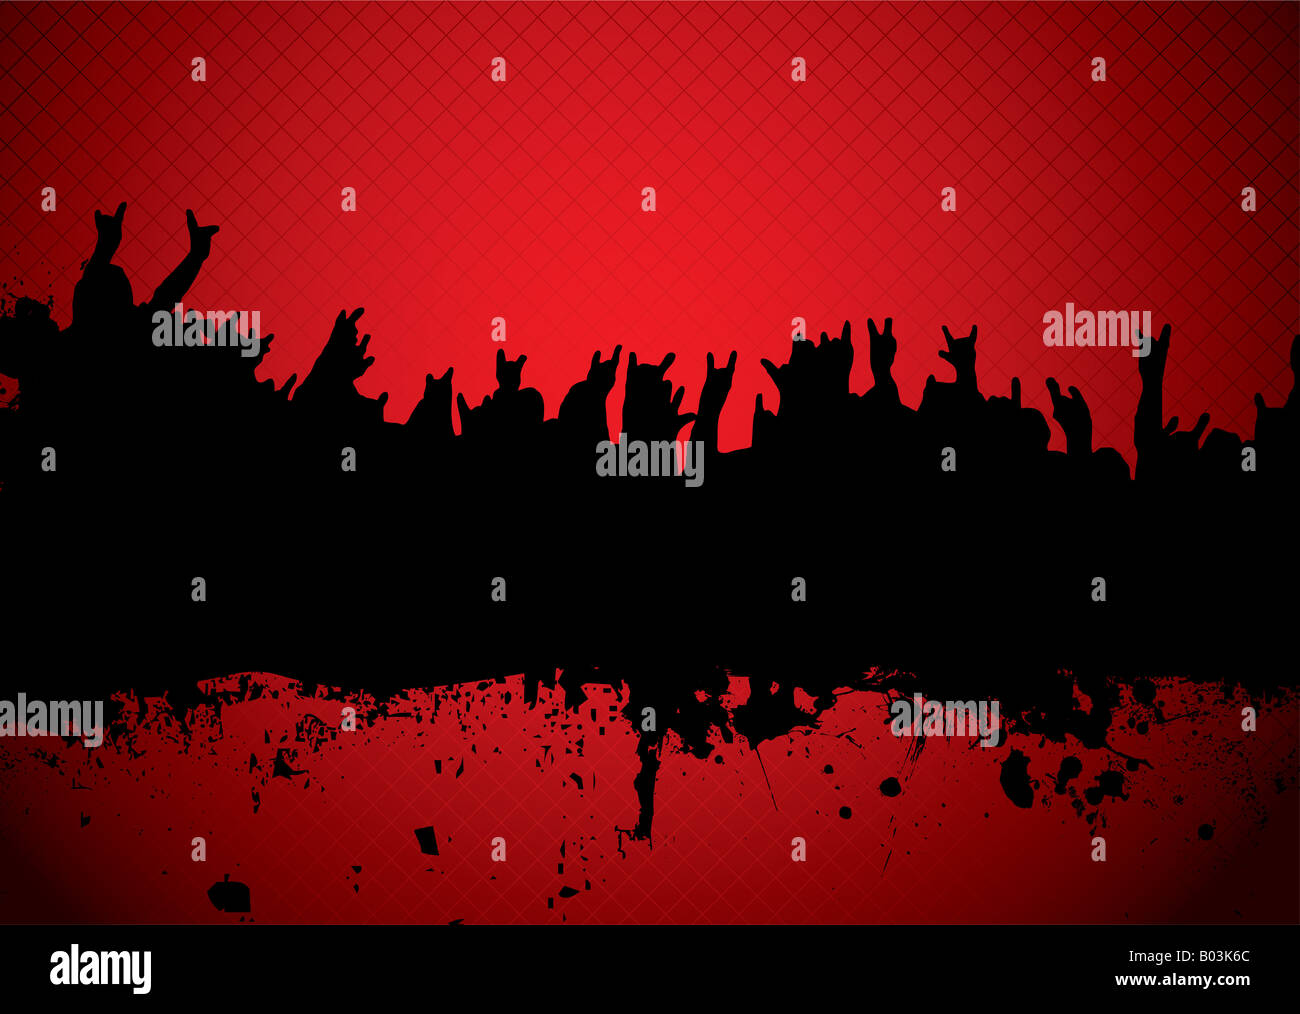 red and black silhouette of a rock concert crowd Stock Photo